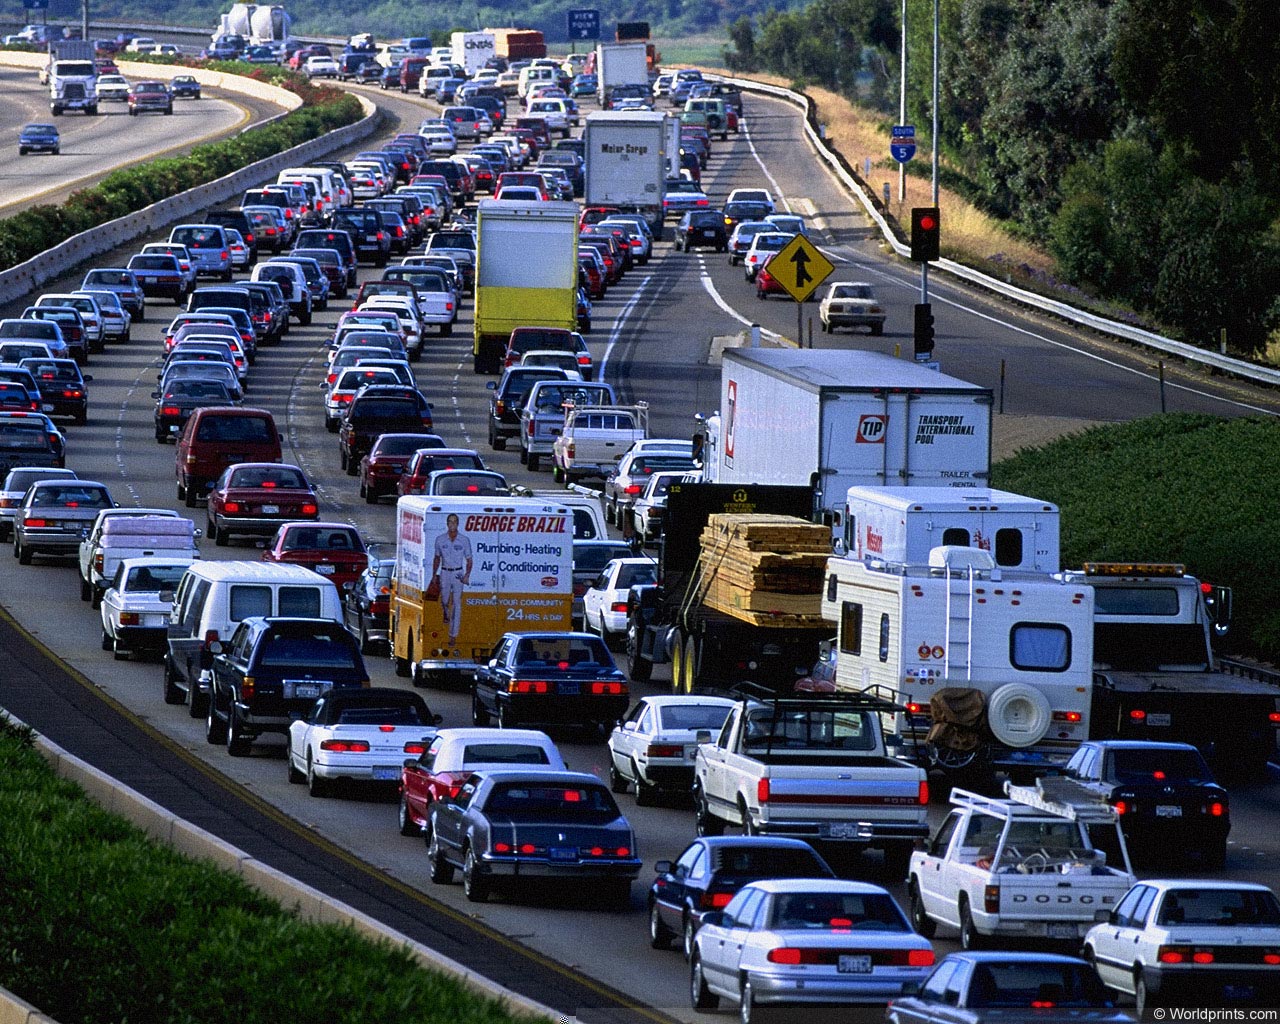 Do you have Traffic Jam Pictures? - SkyscraperPage Forum